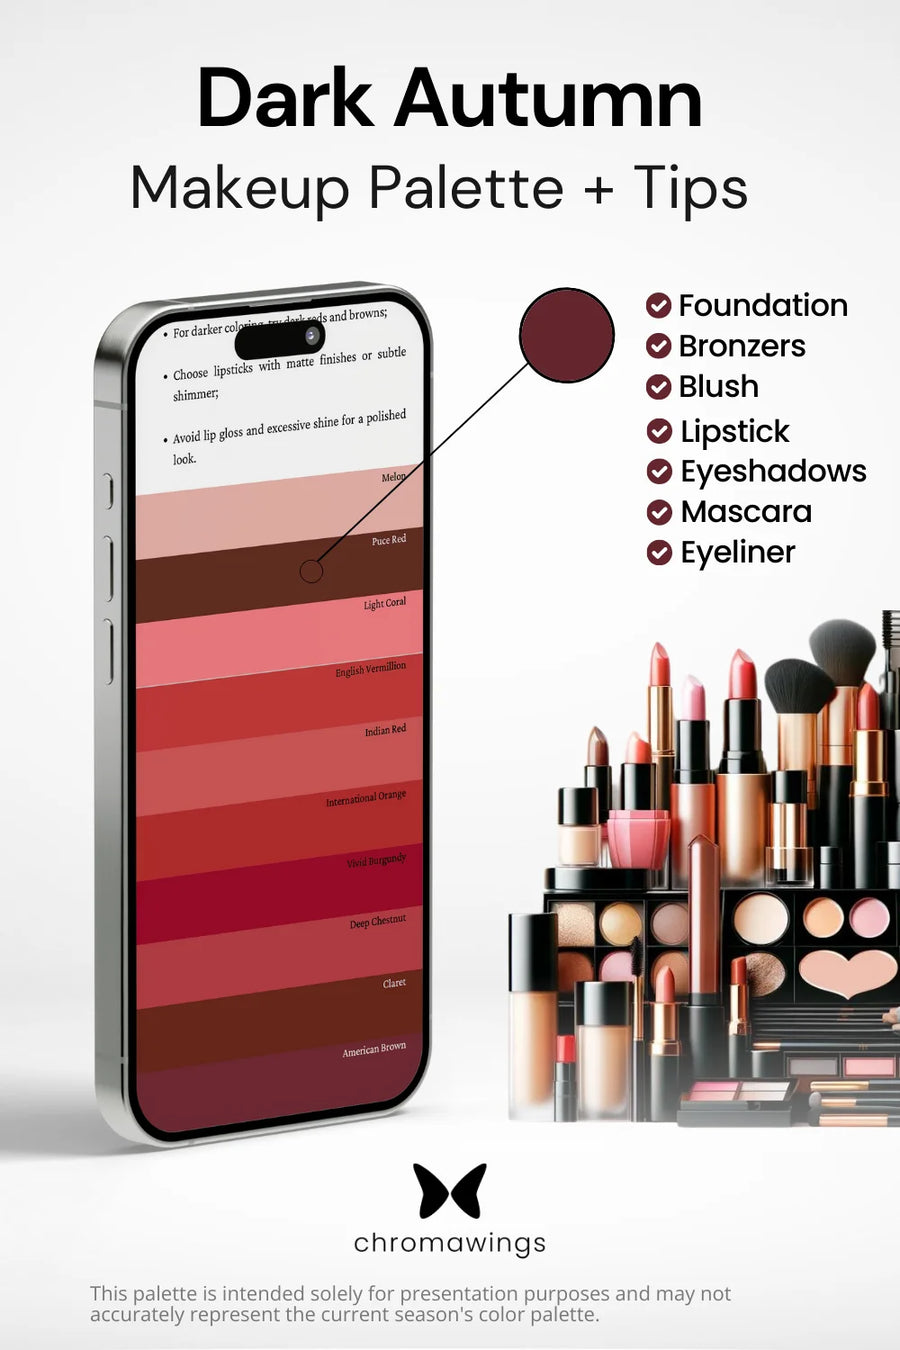 Dark Autumn Makeup palette on phone, color pinpointed. Palette title, makeup types listed, shelf image.